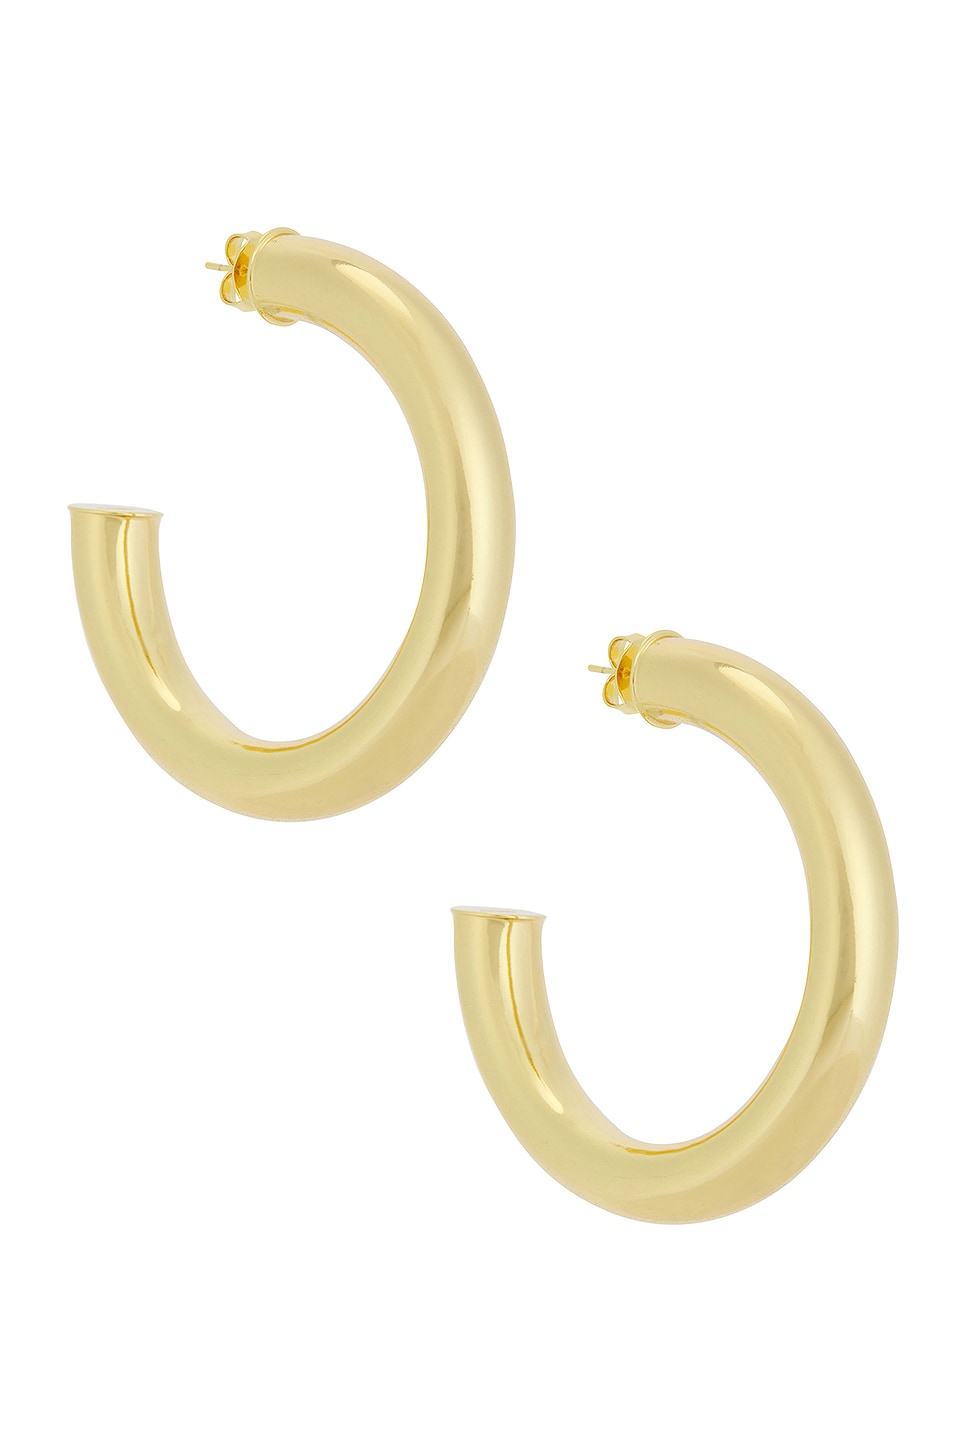 Image 1 of Eliou Kayo Earrings in Gold Plated